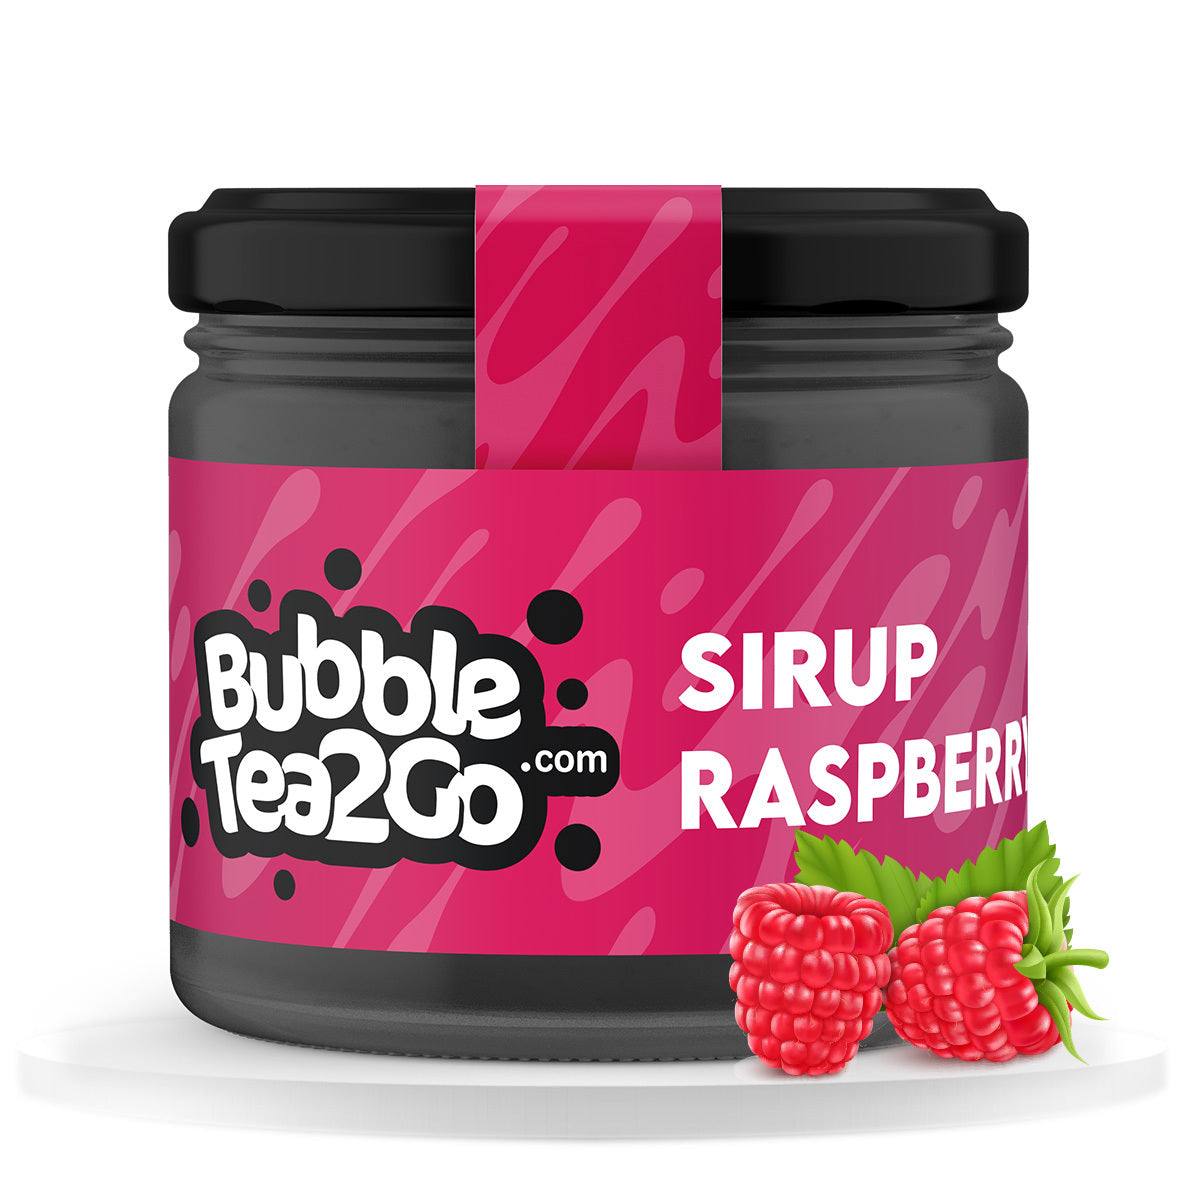 Sirop - Framboise 2 portions (50g)